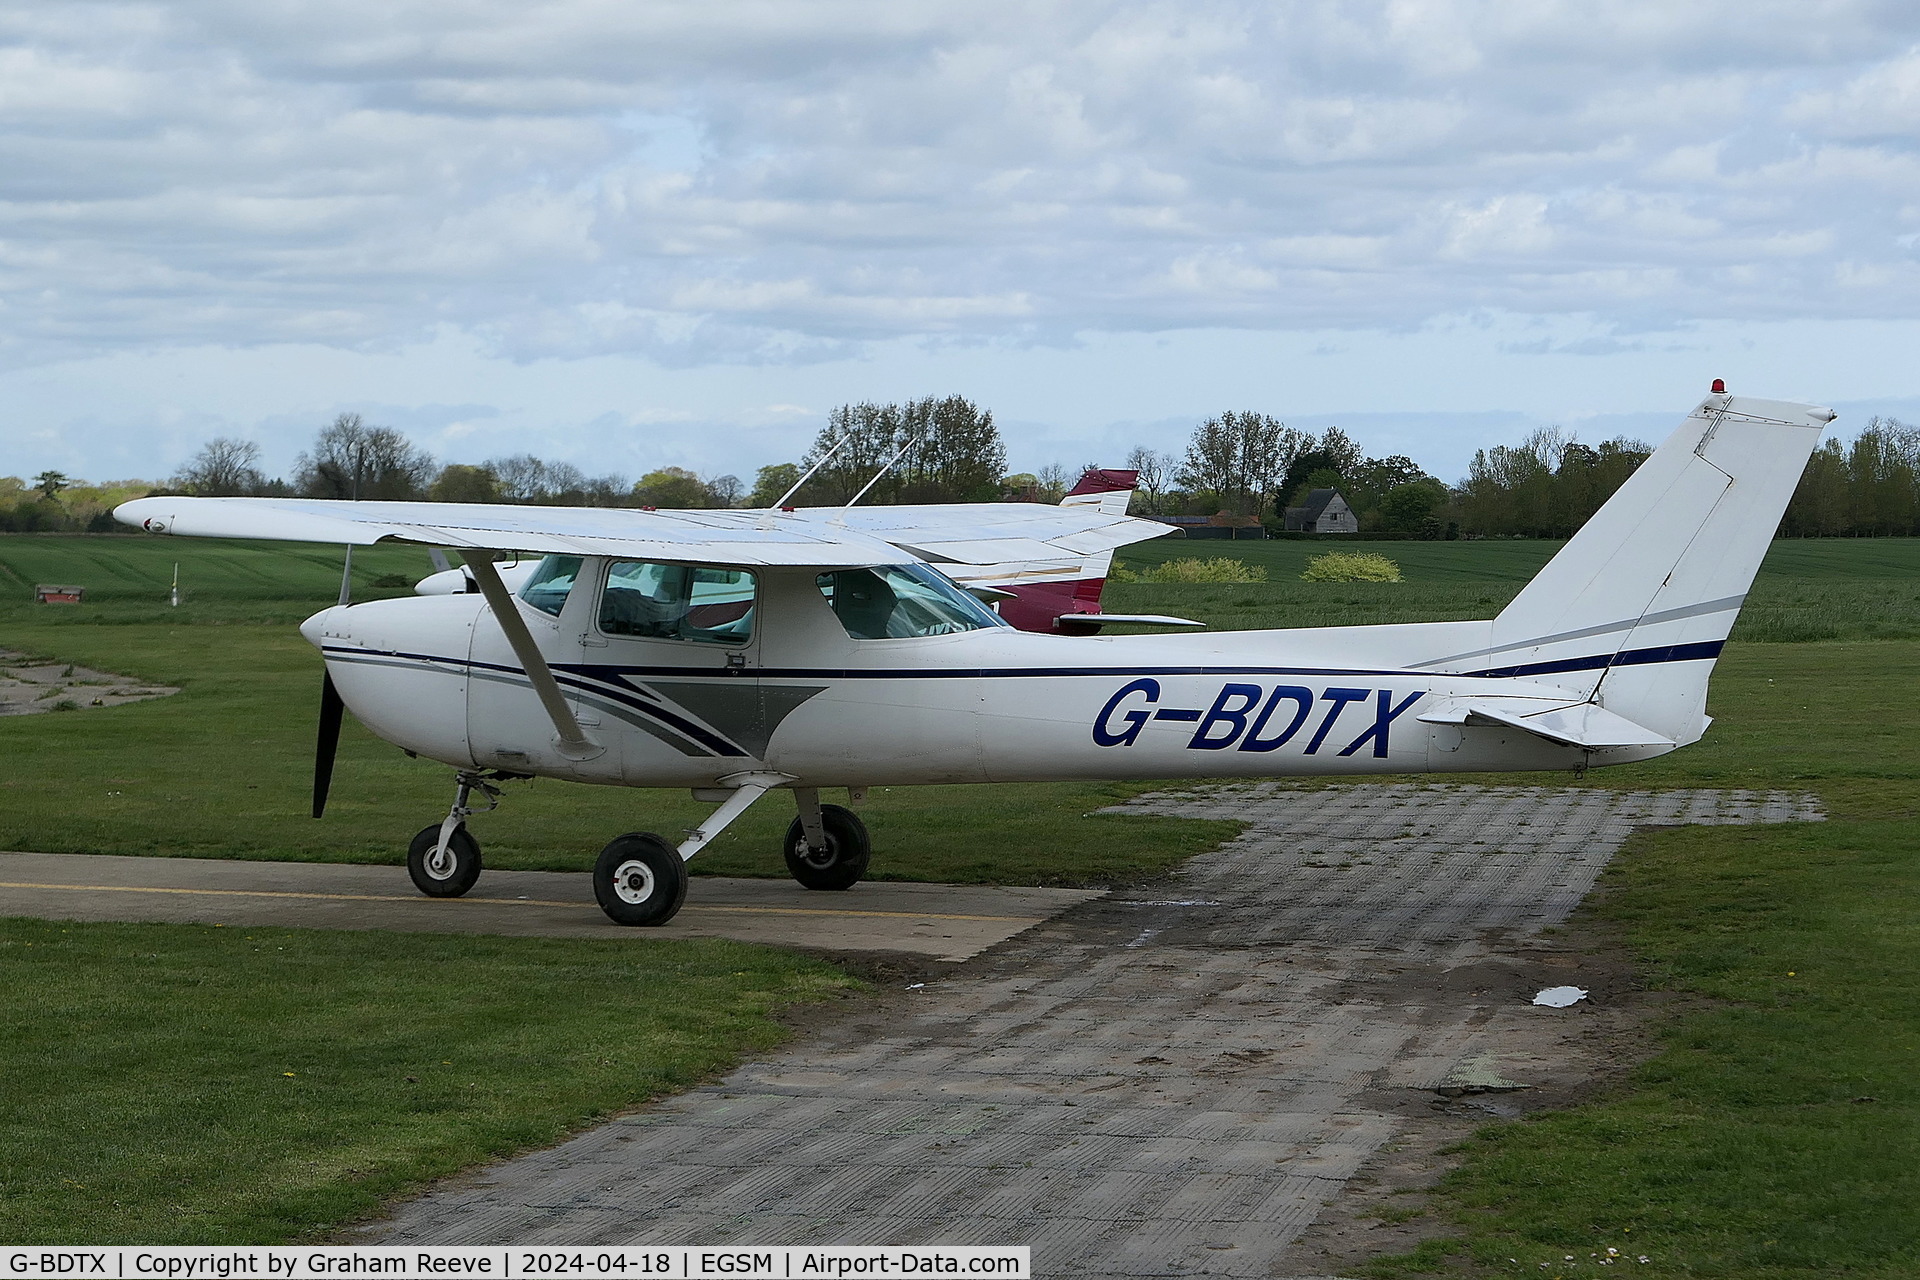 G-BDTX, 1976 Reims F150M C/N 1275, Parked at Beccles.